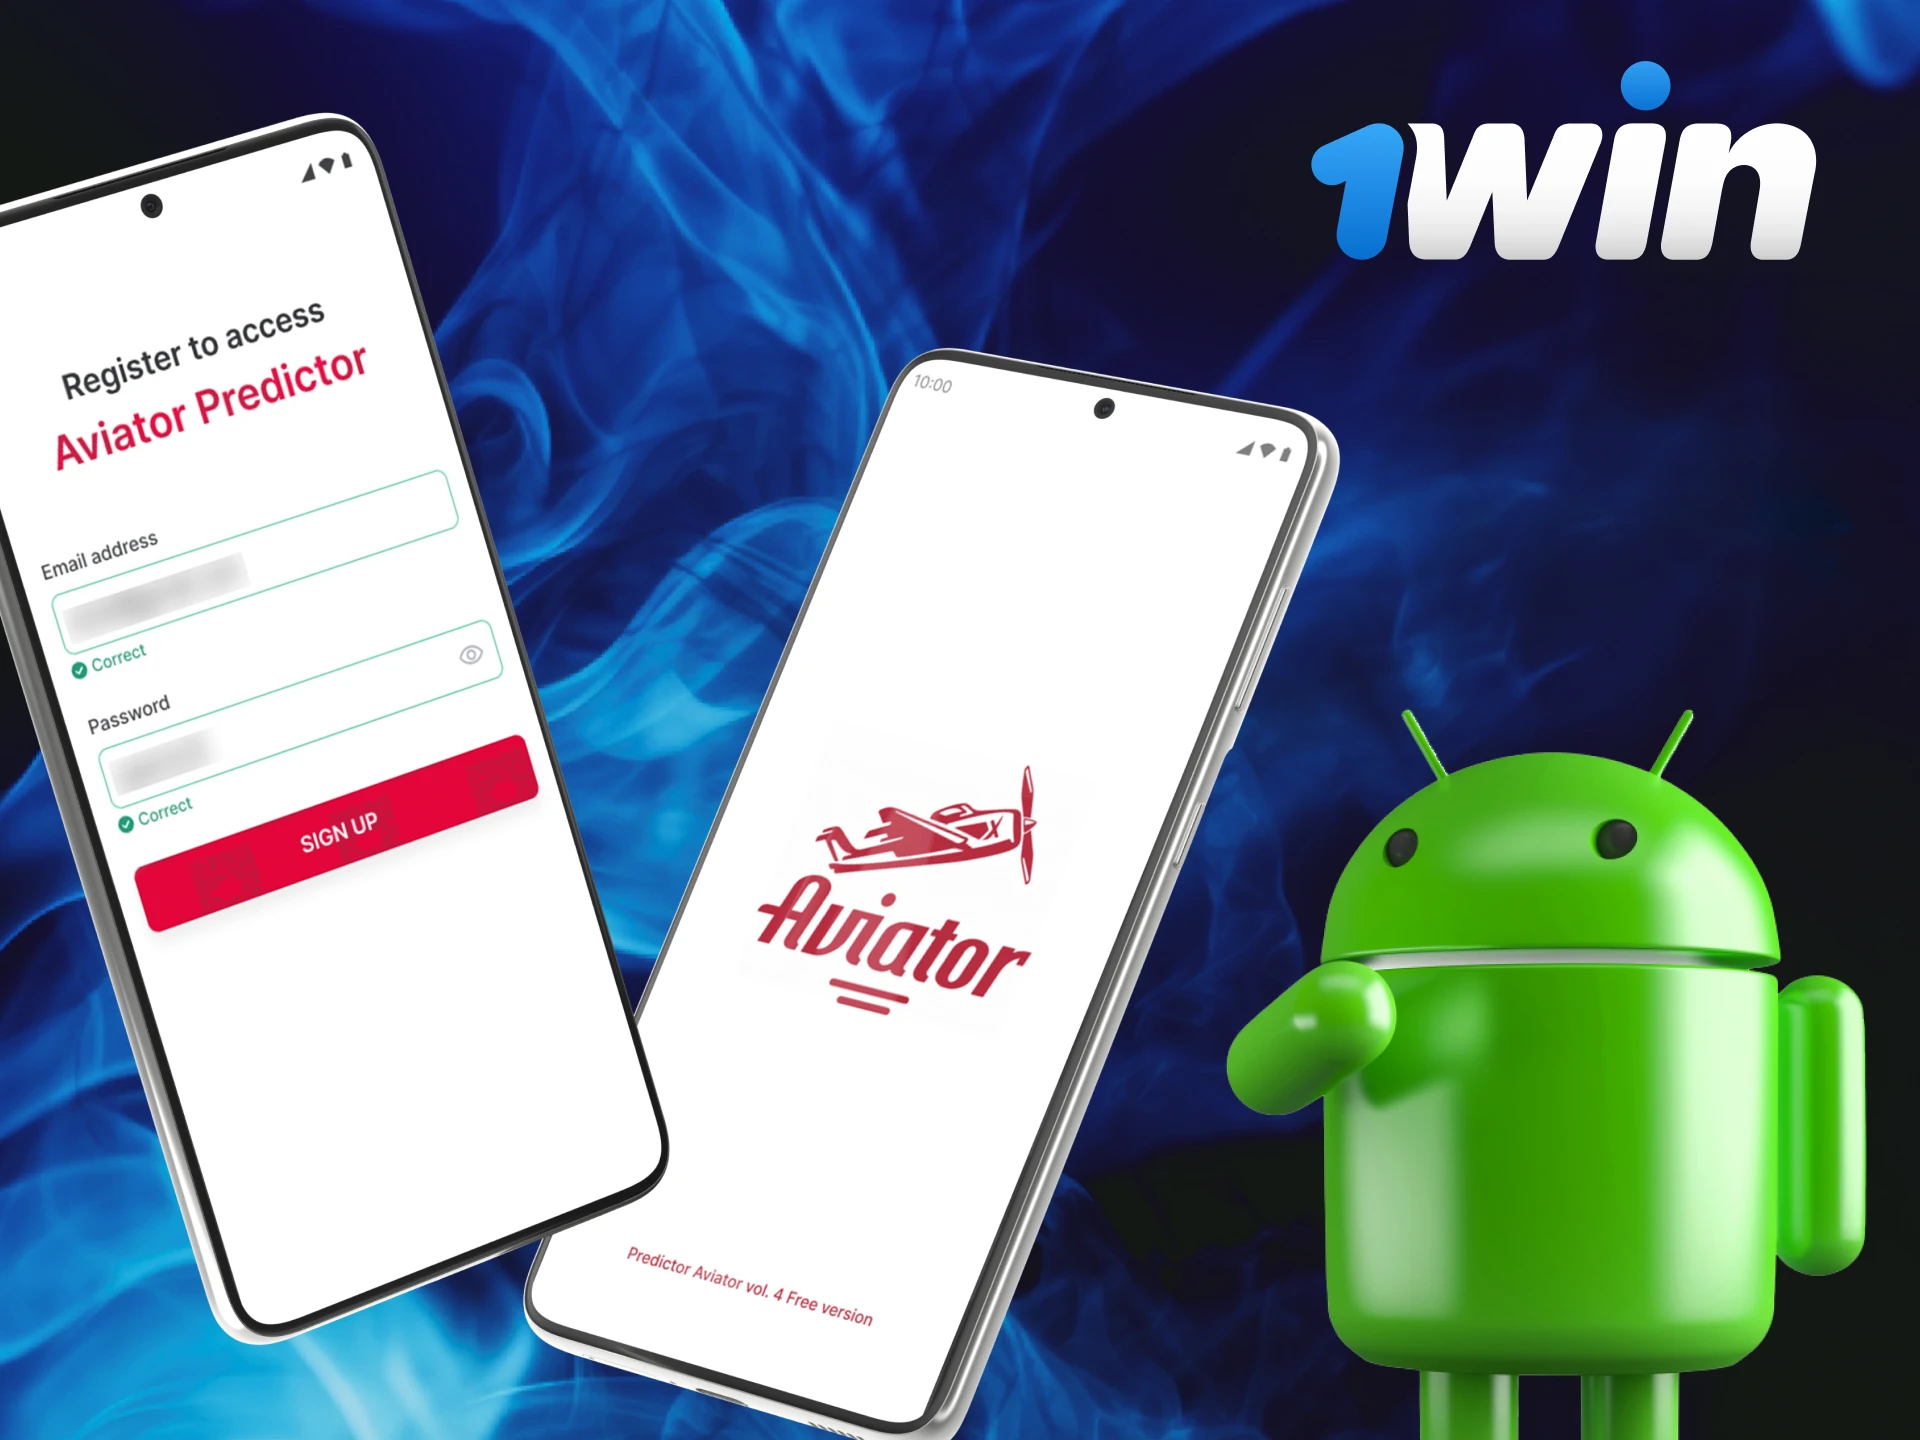 Instructions on how to download the predictor for Aviator in 1Win casino on Android.